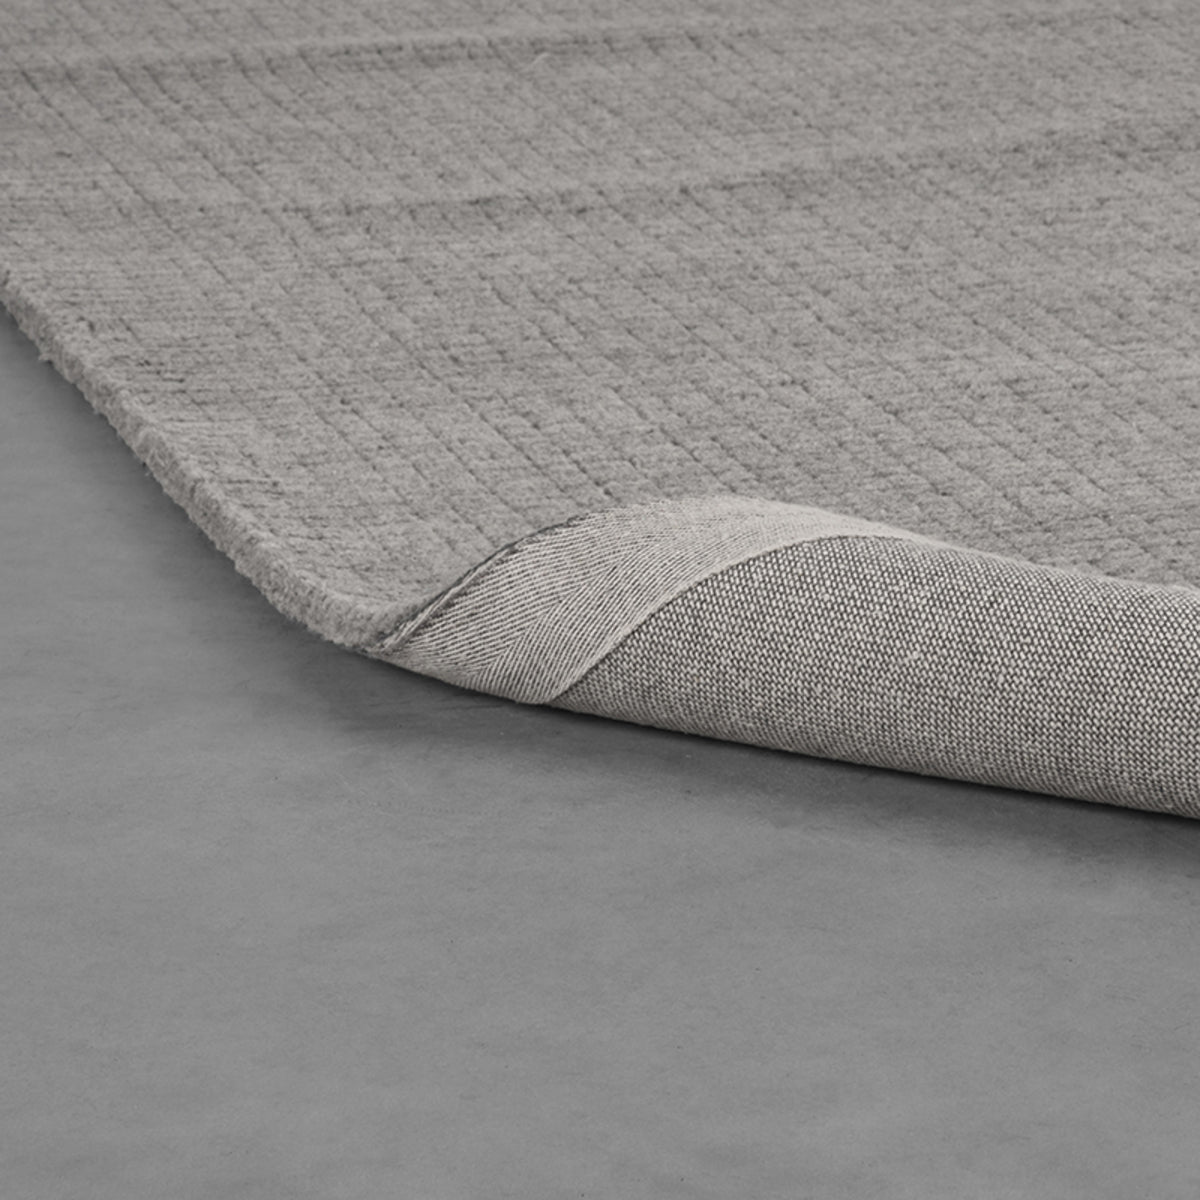 LABEL51 Rugs Wolly - Gray - Wool - 160x230 cm